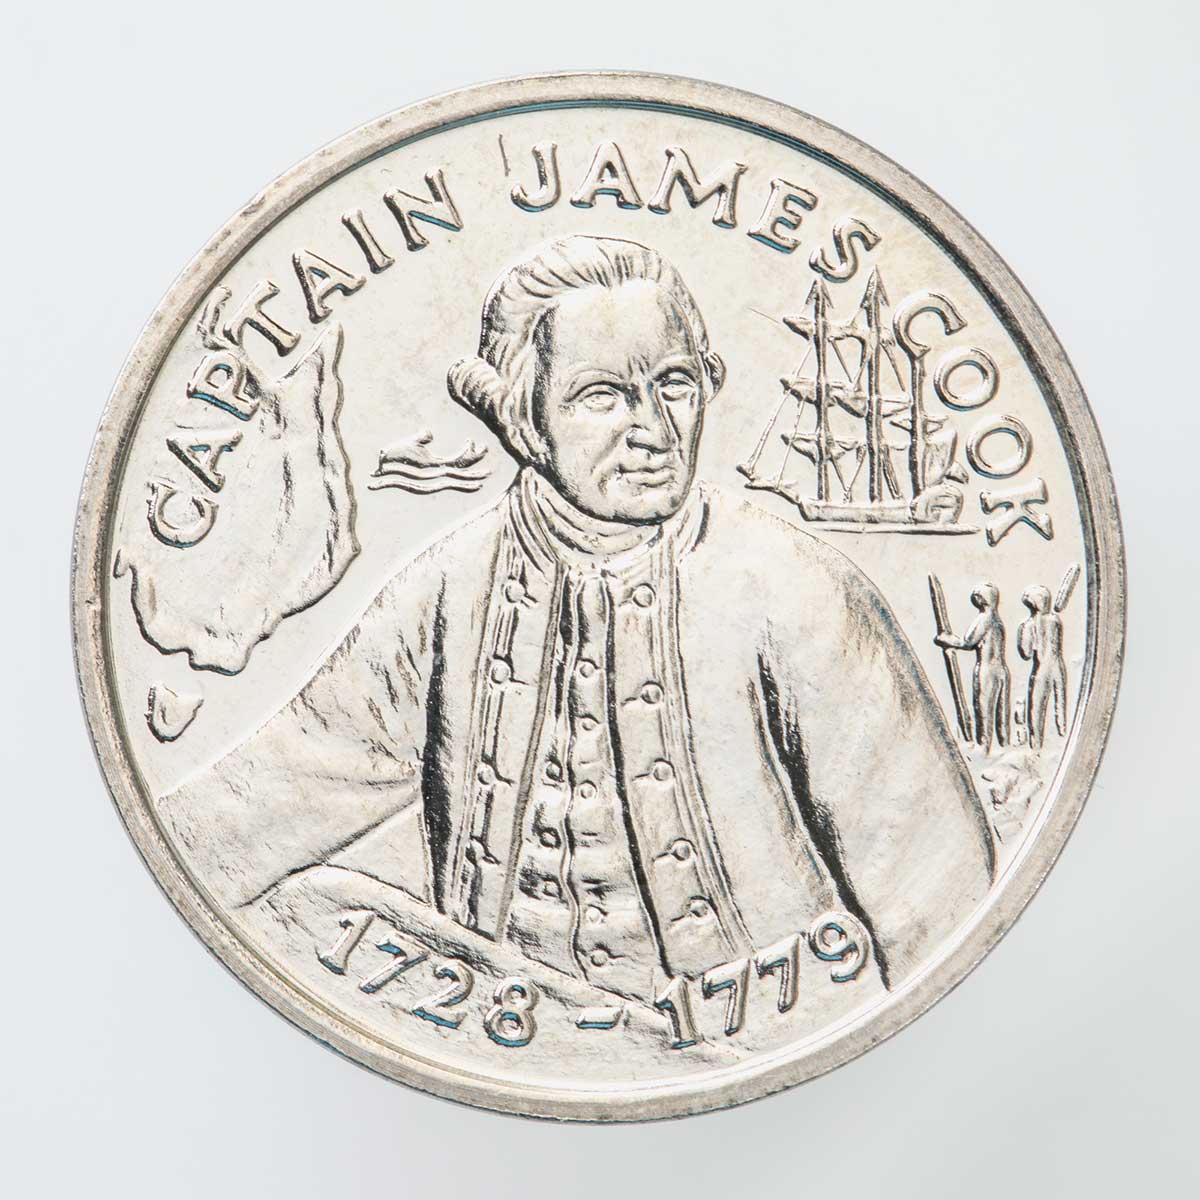 A silver coloured metal commemorative medal depicting Captain James Cook. Smaller images of a ship, Indigenous Australians and the east coast of Australia are depicted on the front, with text stating "Captain James Cook" and dates "1728-1779" inscribed on the medal.